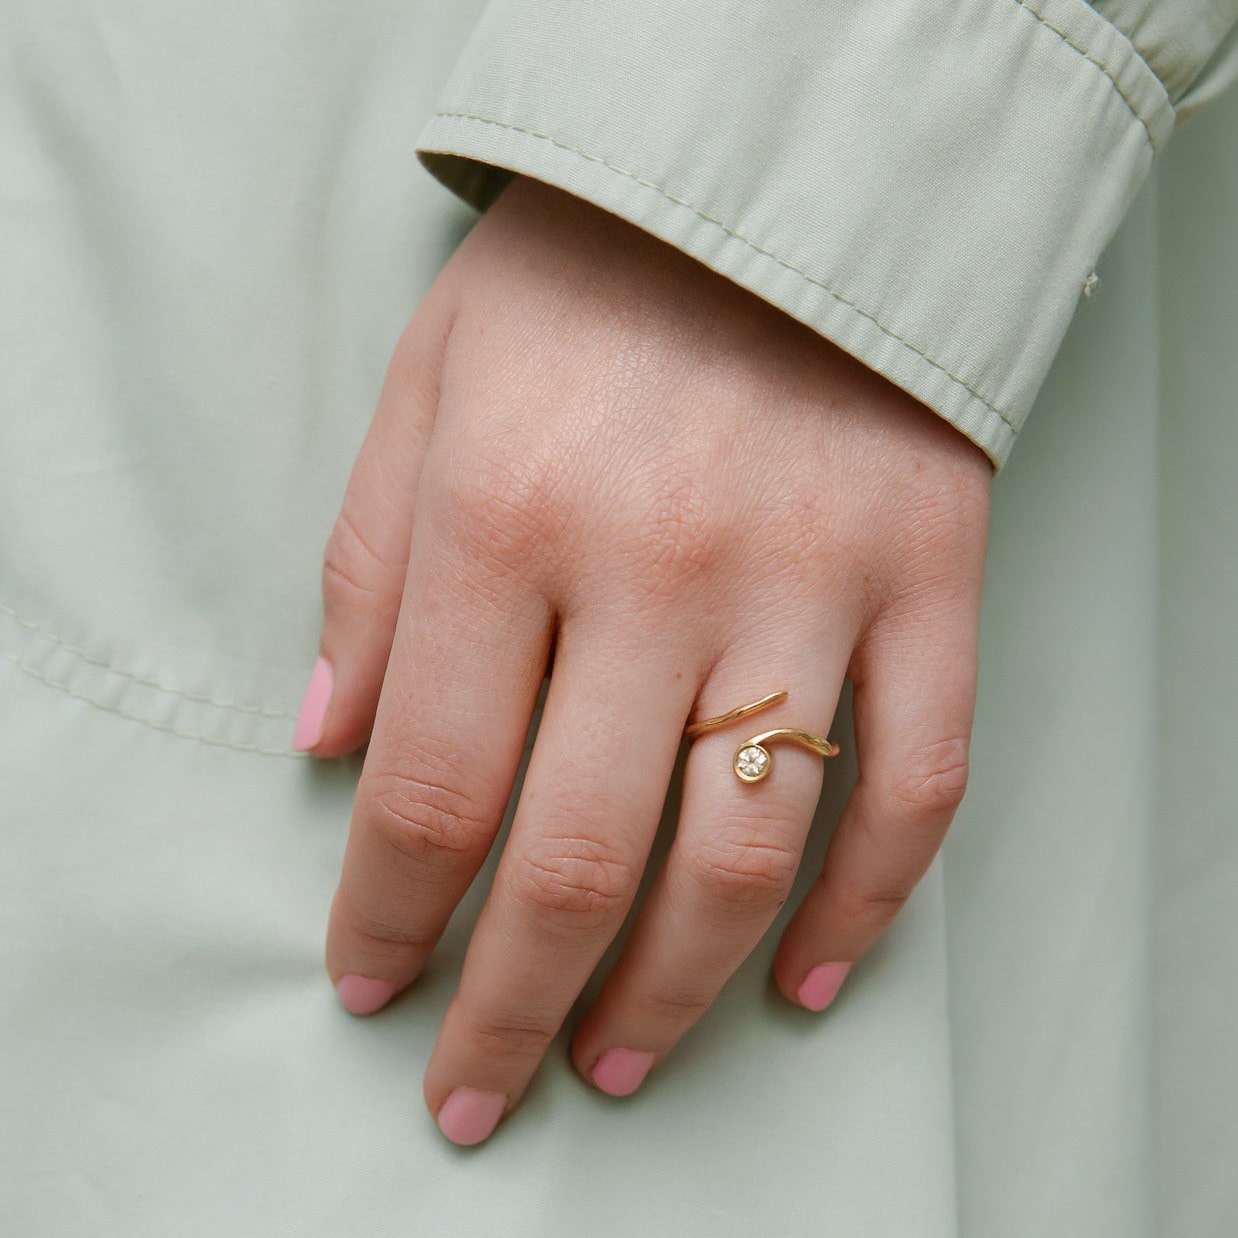 Simone Noa Spirulina gold plated silver sapphire ring on hand of model.